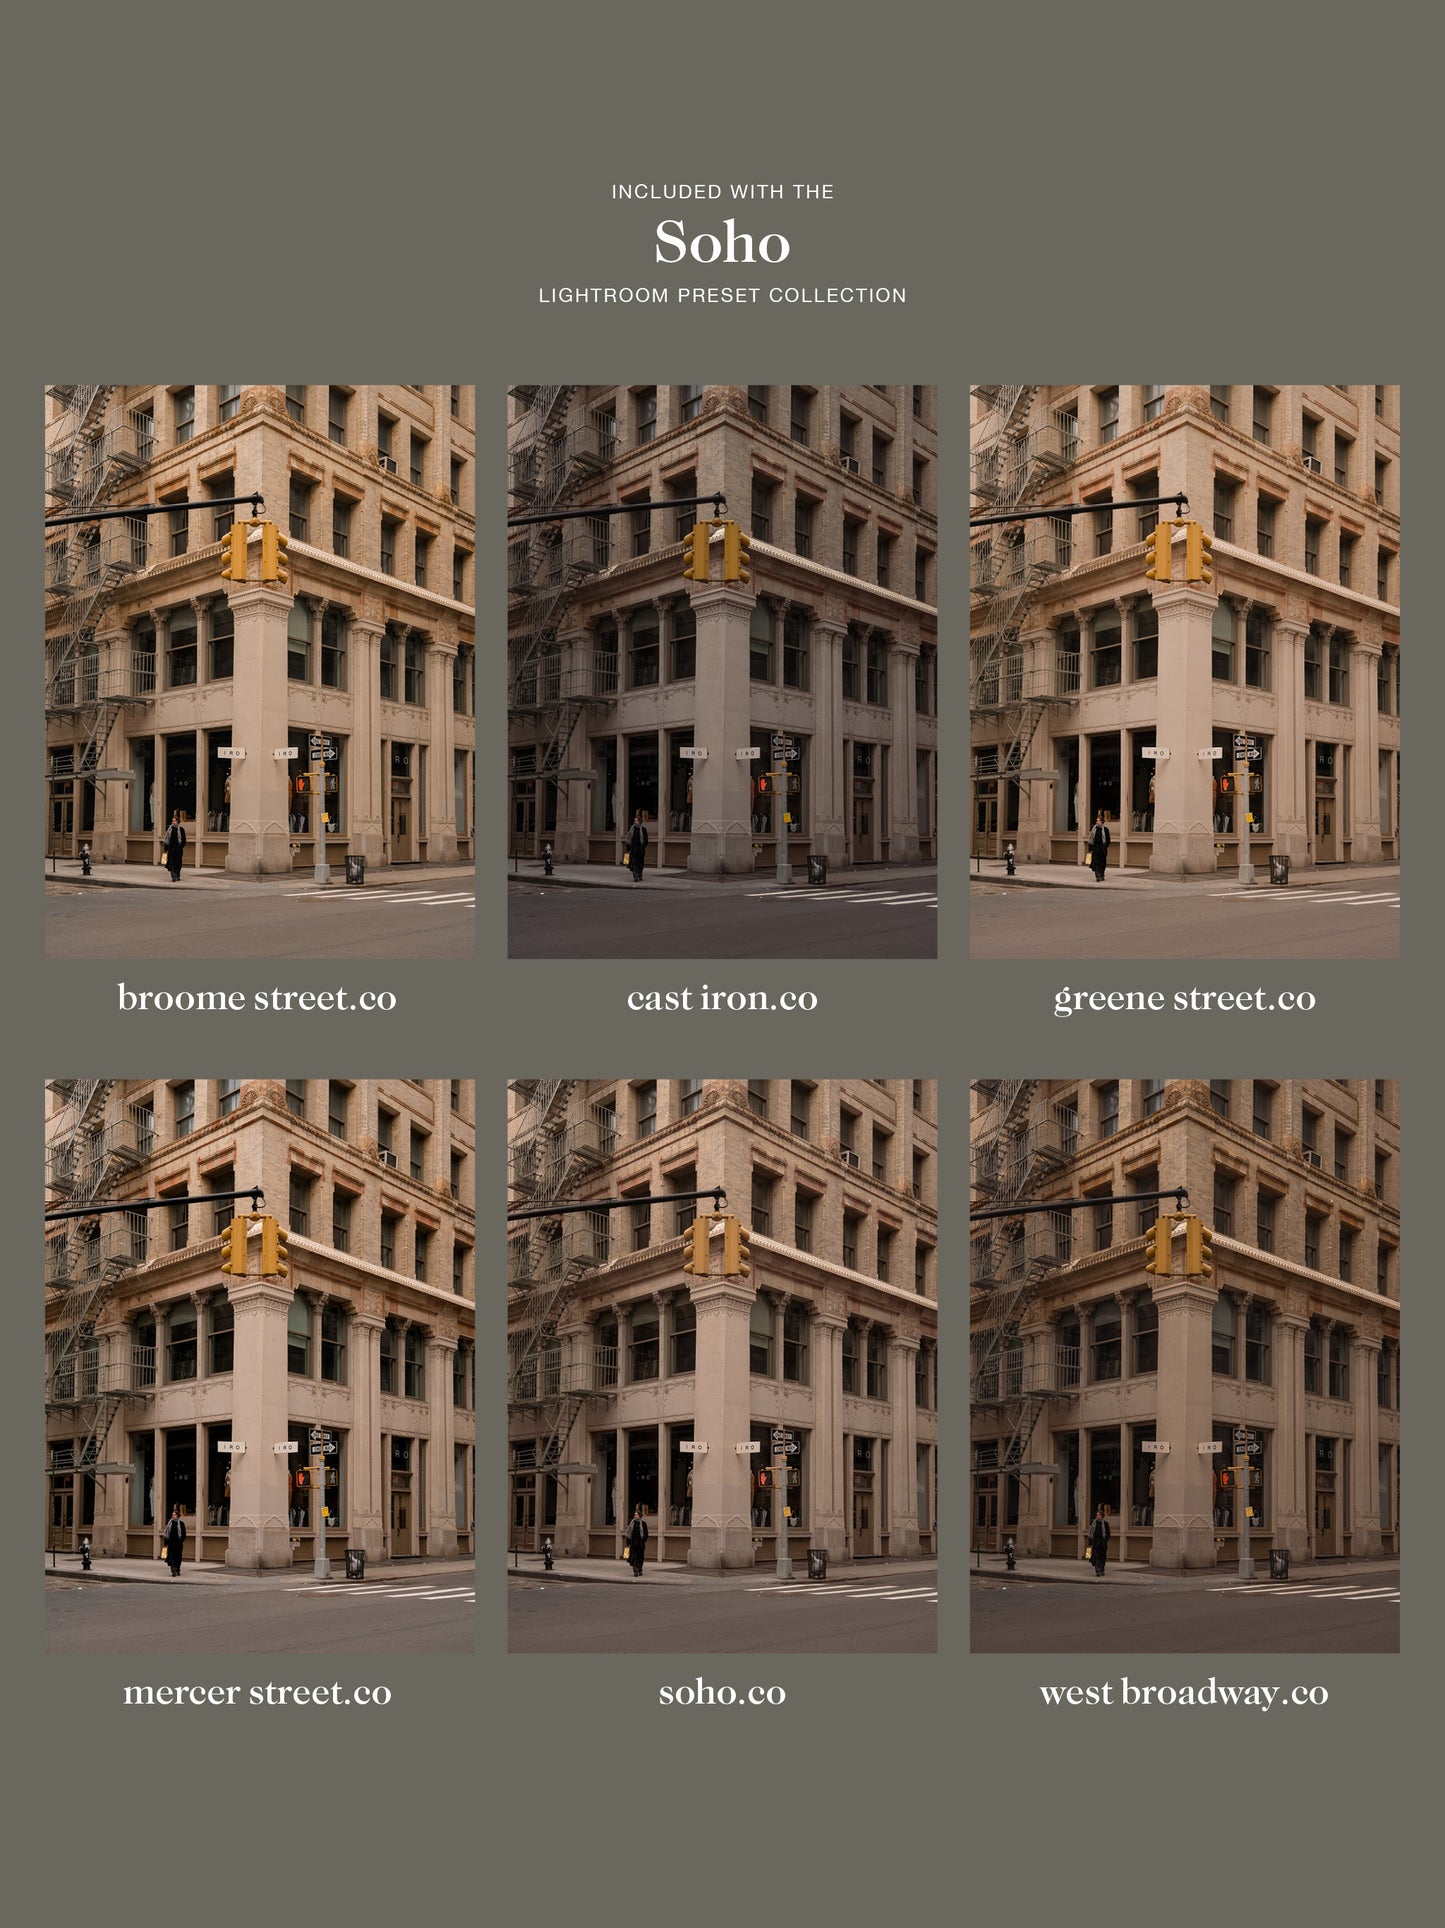 The Complete "Soho" Lightroom Preset Collection